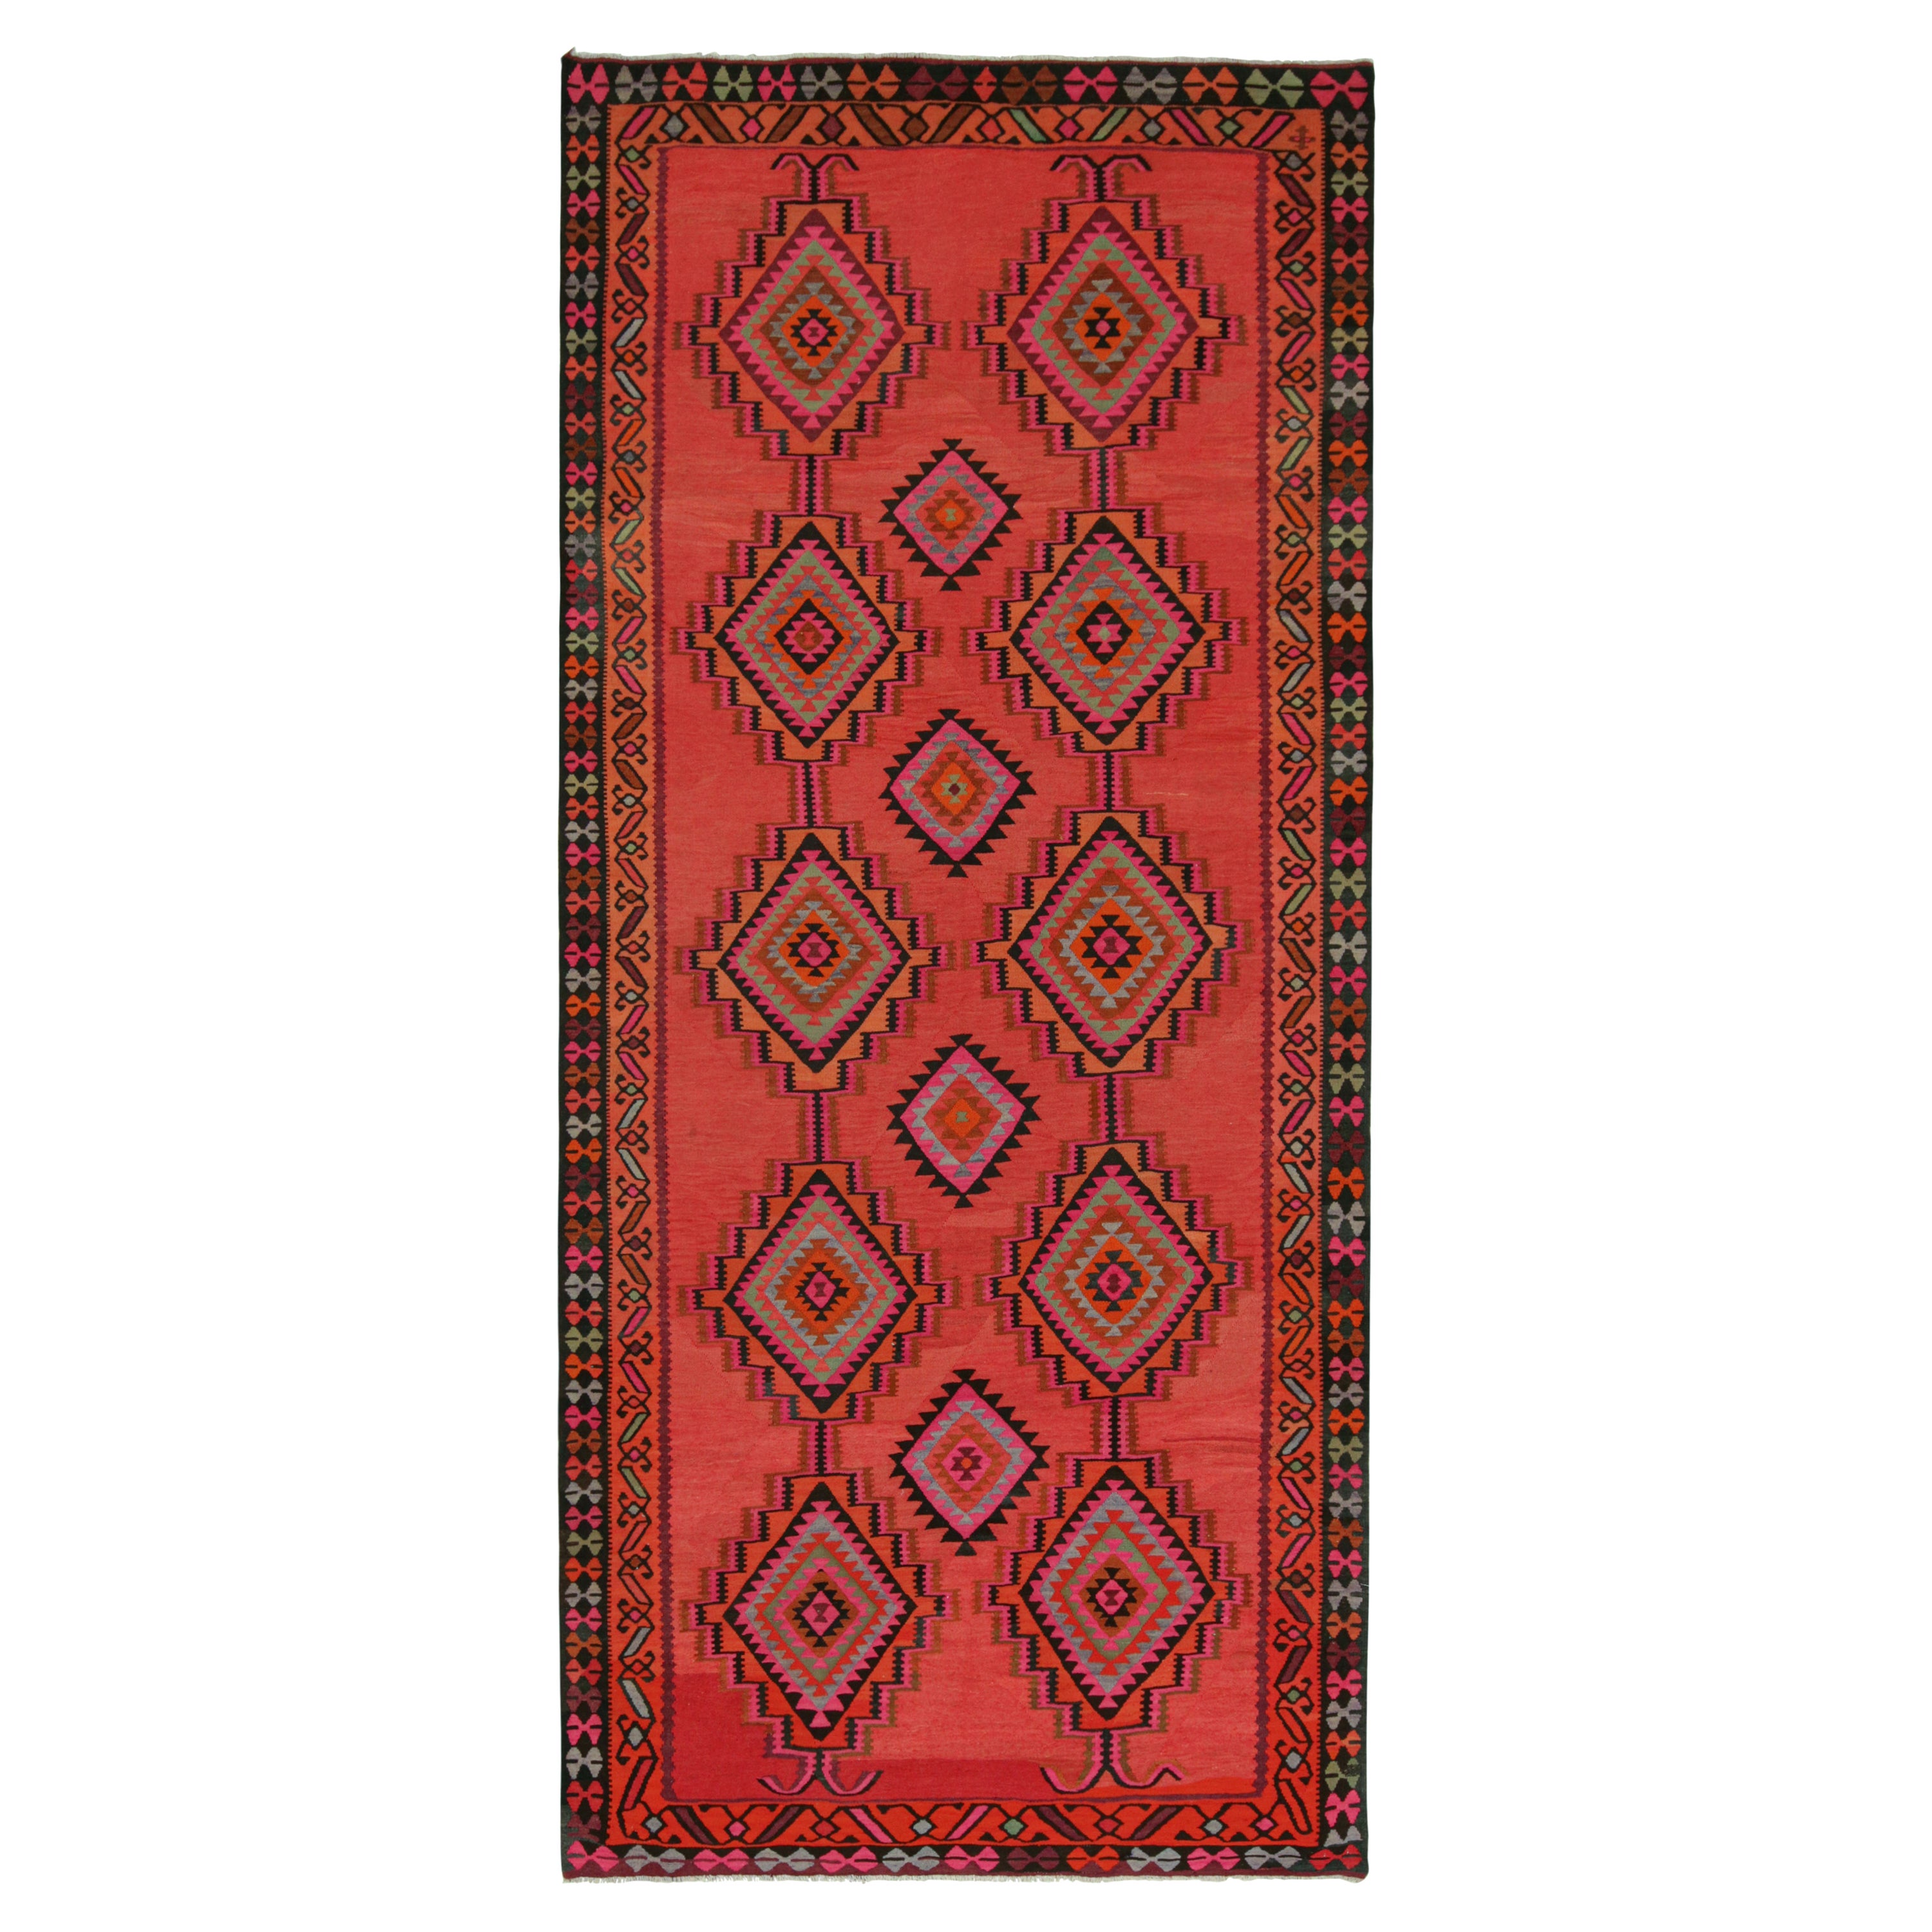 Vintage Persian Kilim in Red & Black with Diamond Patterns by Rug & Kilim For Sale